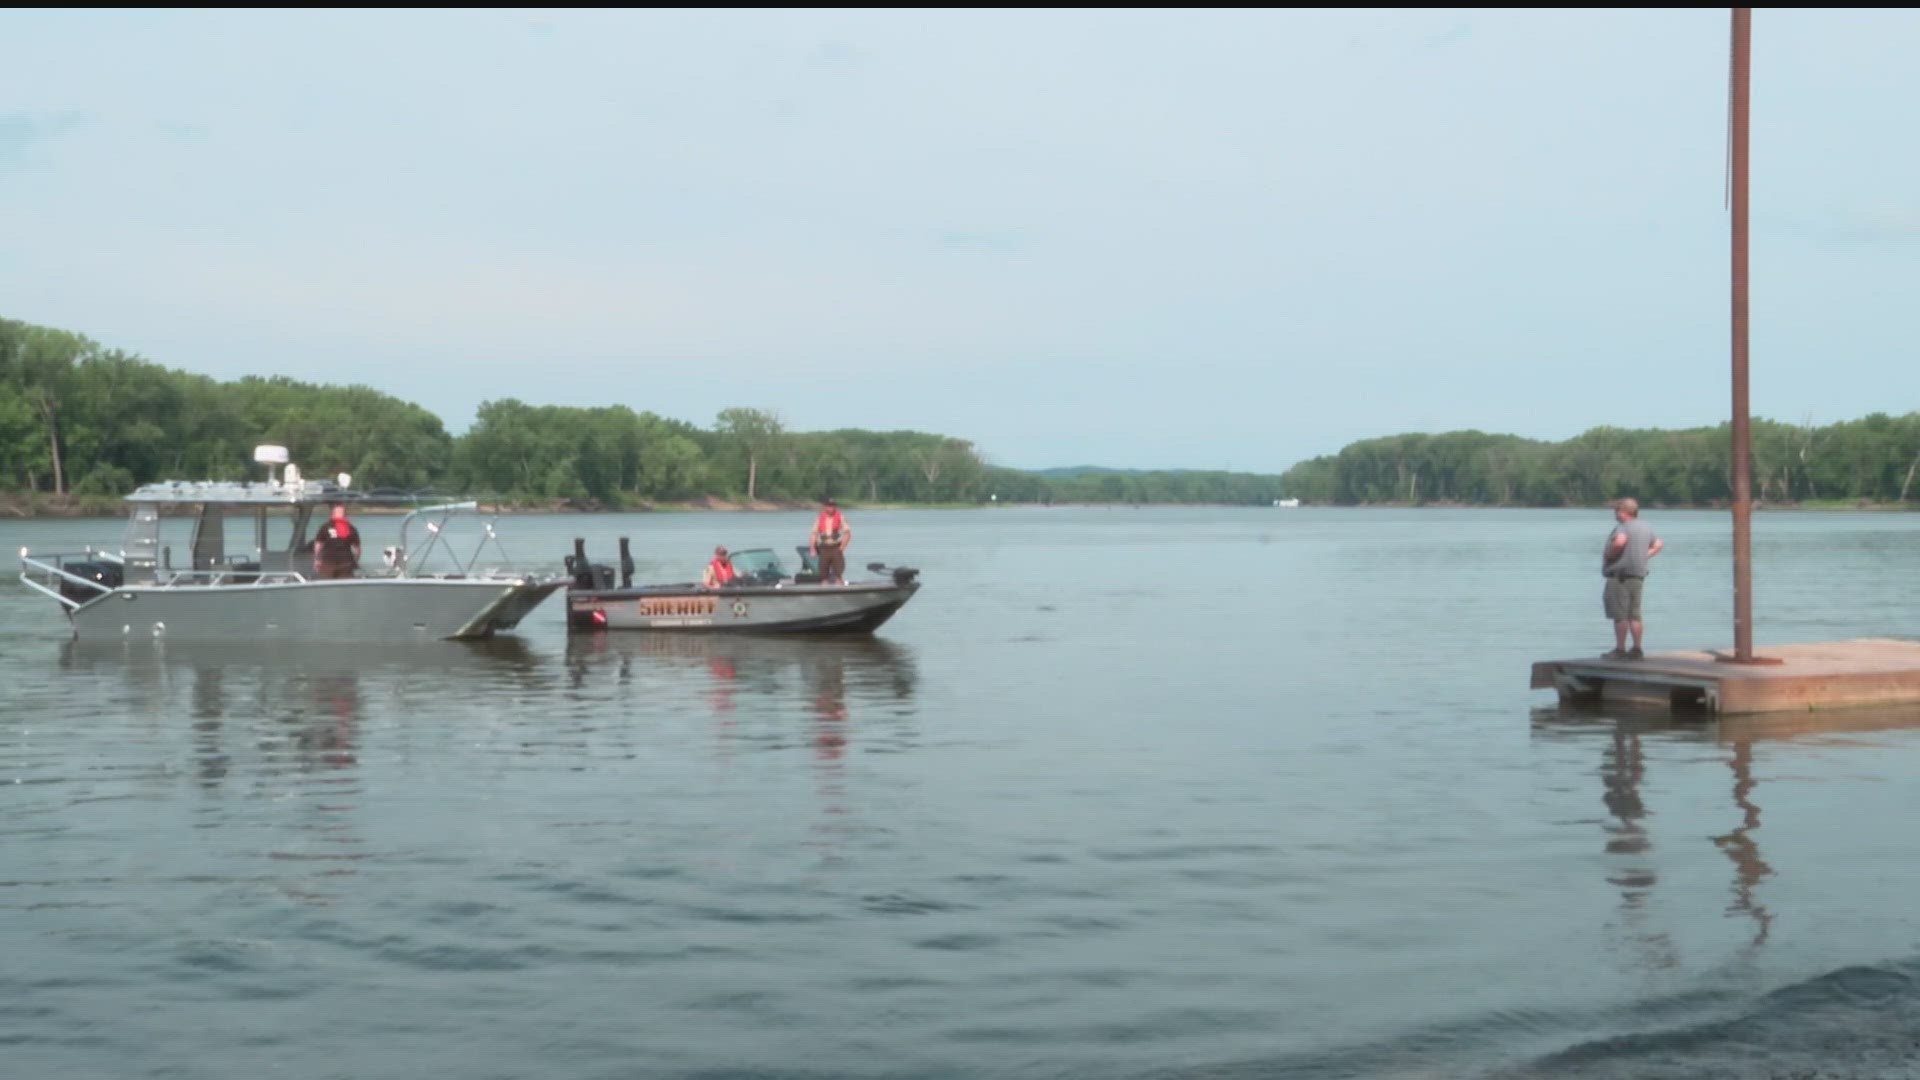 Authorities want folks to have fun, but be aware of dangers lurking on a beautiful day.